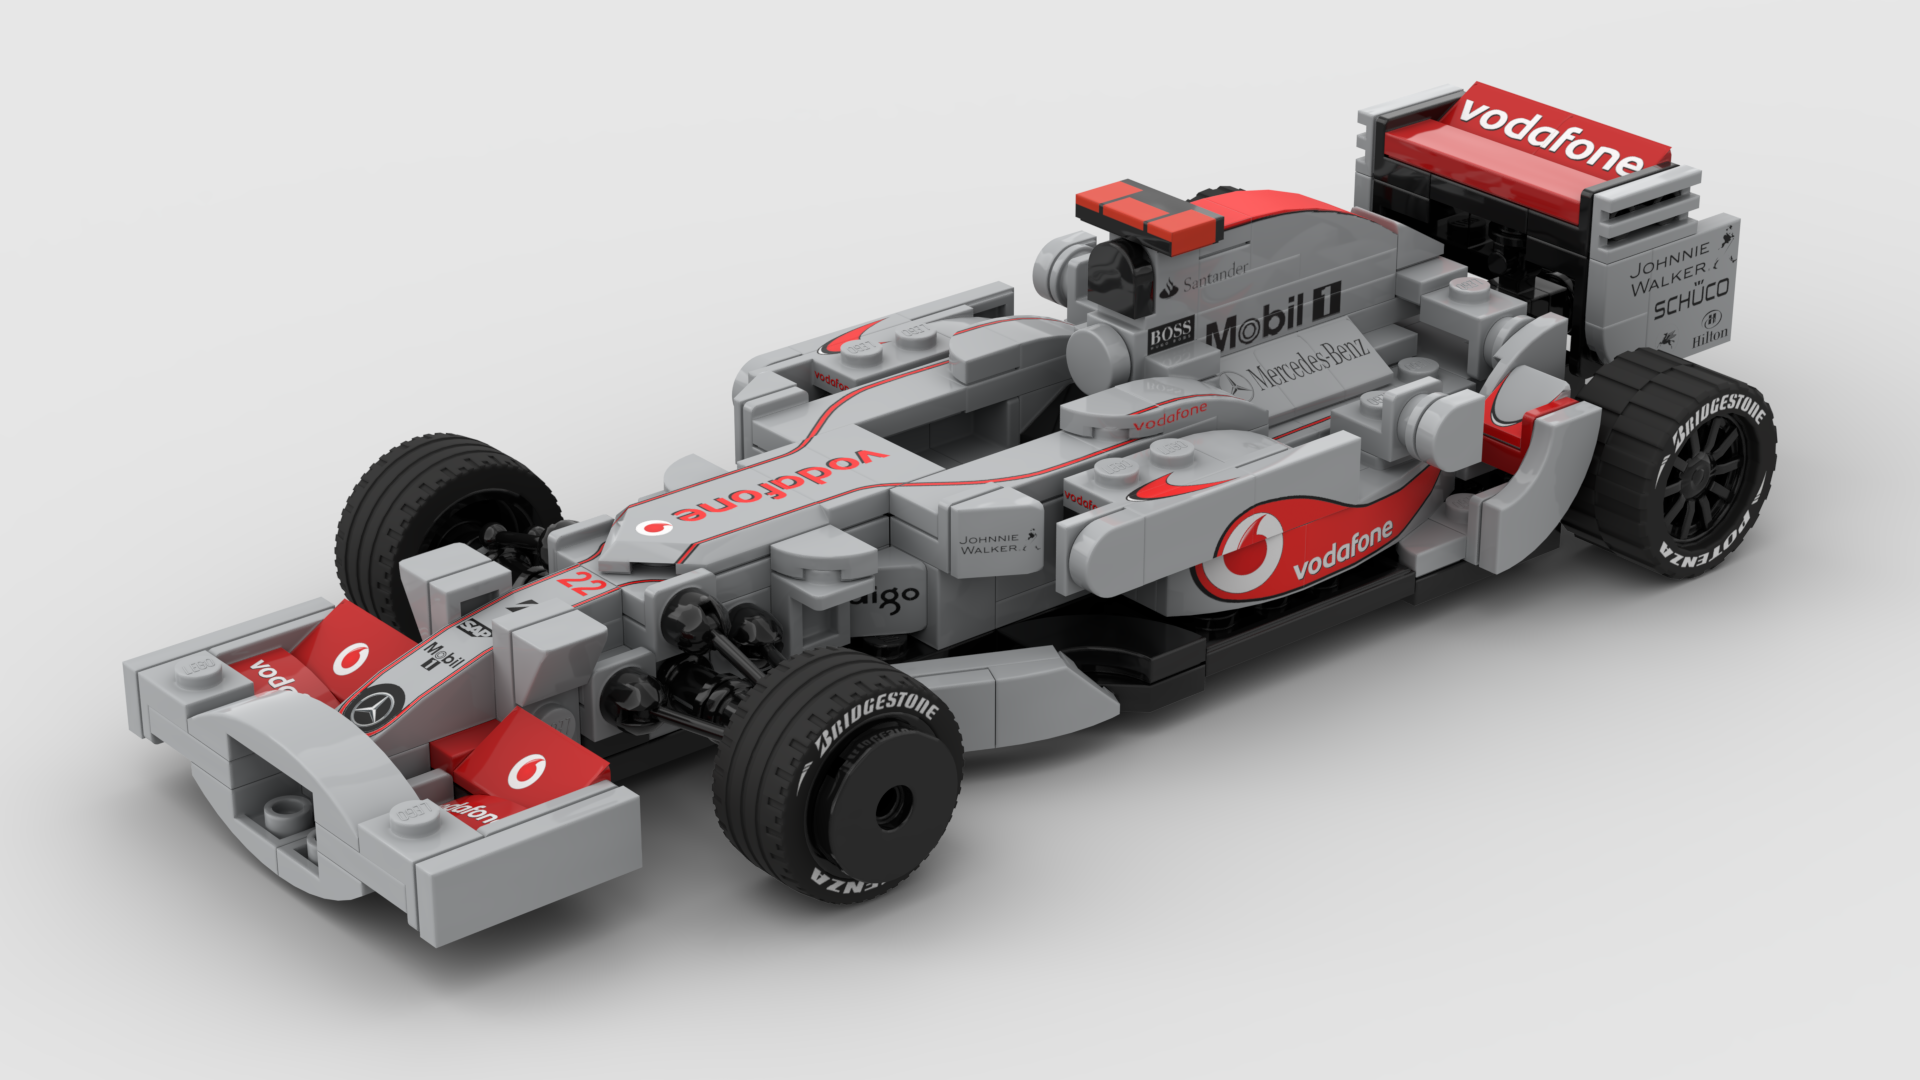 Lewis Hamilton's F1 Car Is A Lego Set, But He's Not In It